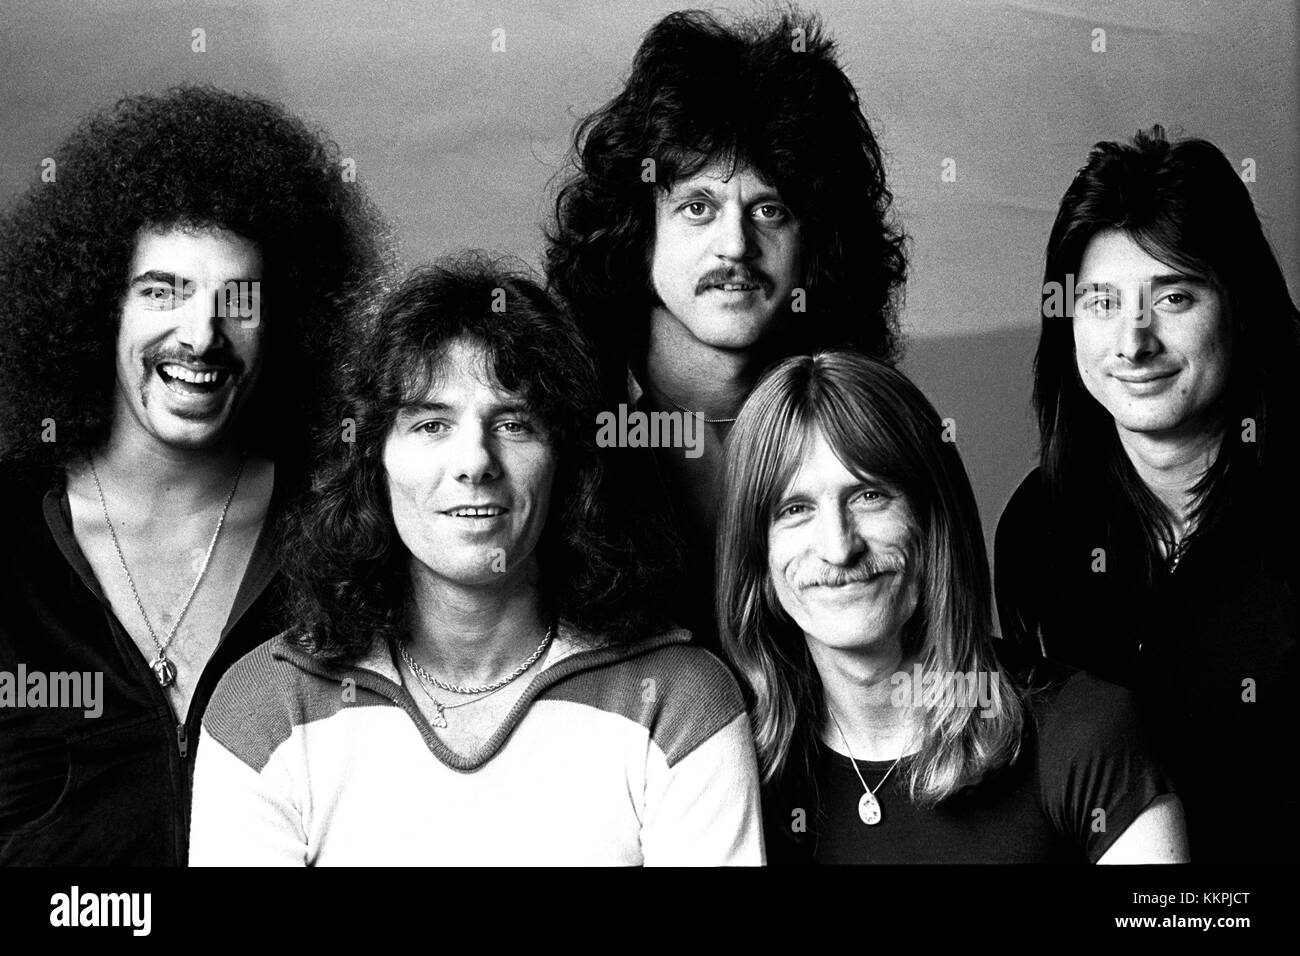 Journey photographed in 1979.  L-r: Neil Schon, Aynsley Dunbar, Gregg Rolie, Ross Valory & Steve Perry.  ** NO TABLOIDS / SKIN MAGS **  Credit: Pat Johnson/MediaPunch Stock Photo